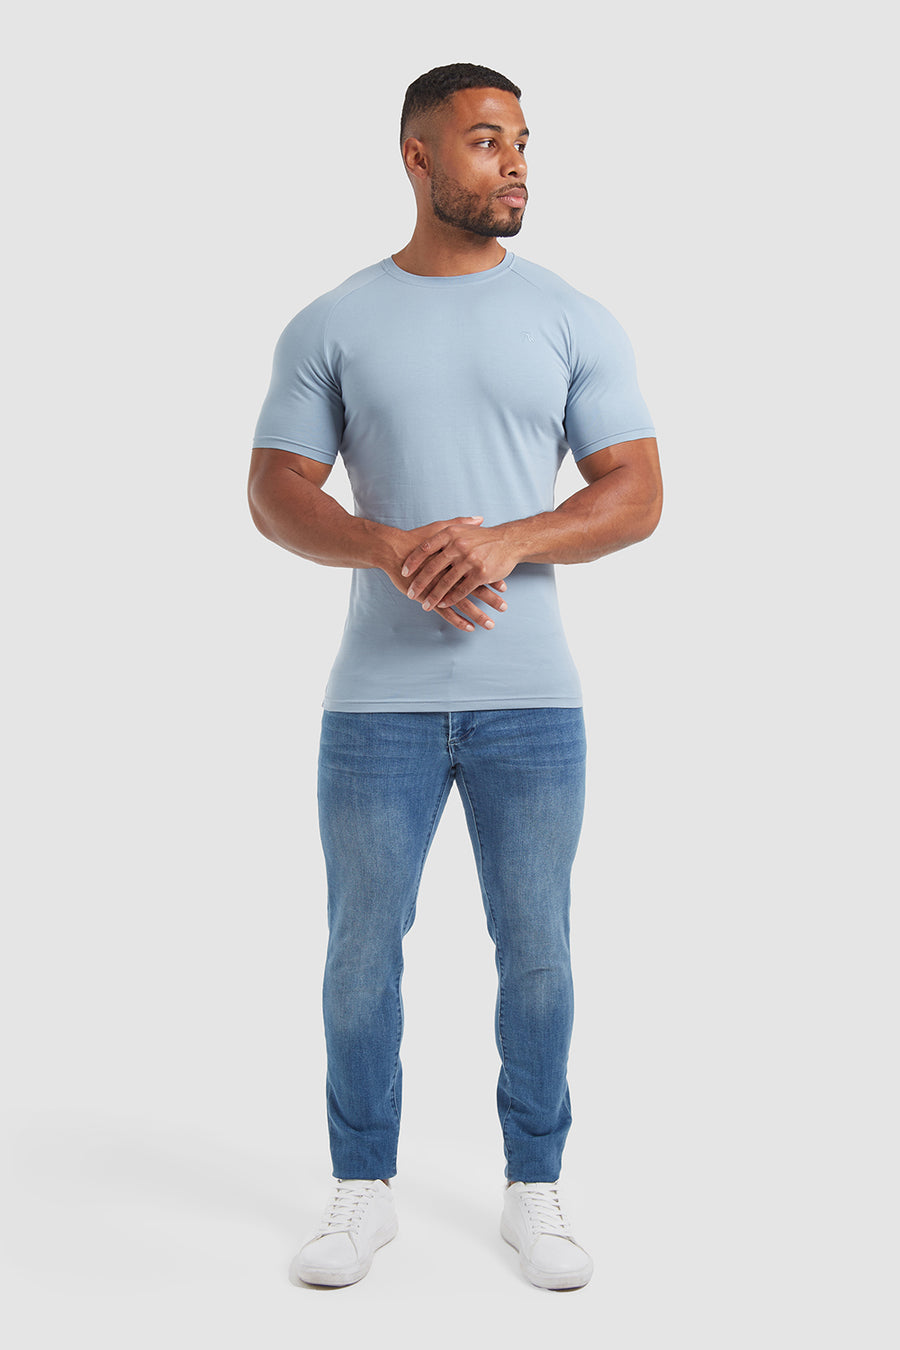 Athletic Fit T-Shirt in Storm - TAILORED ATHLETE - USA